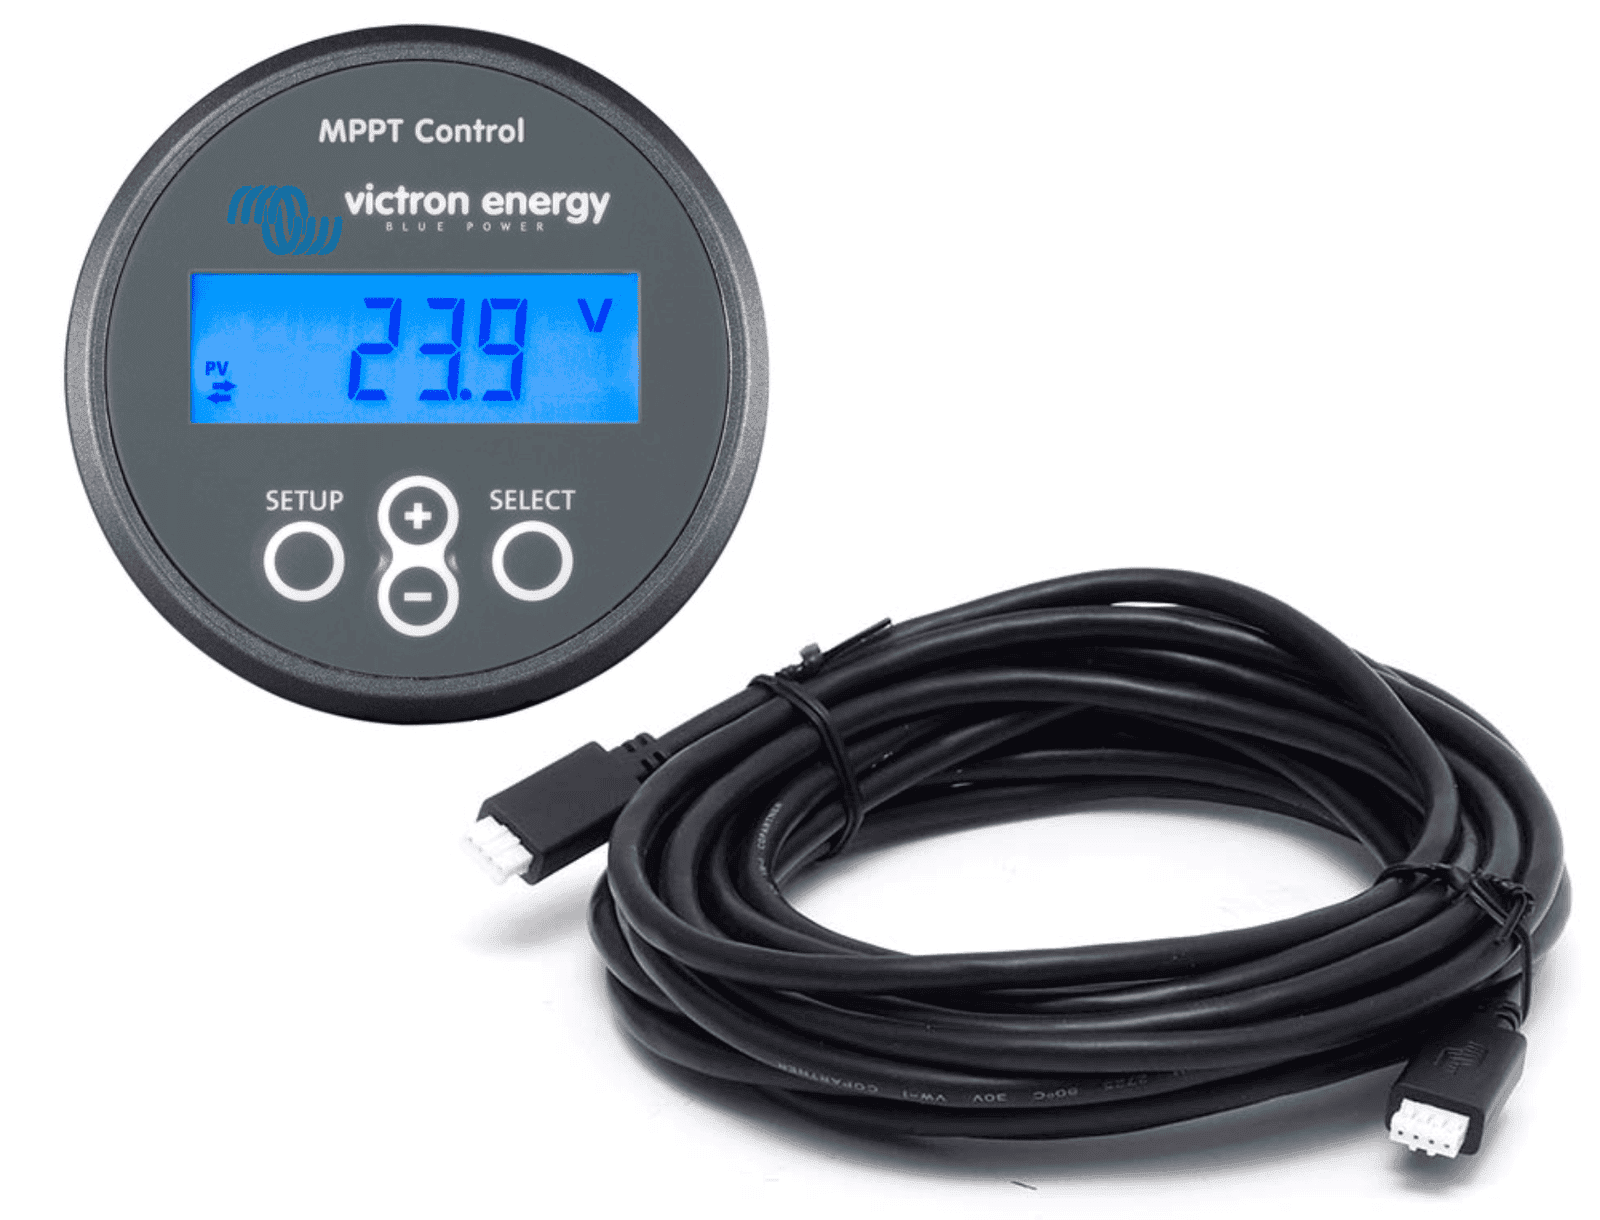 Combo: Blue Solar MPPT Control LCD PLUS 5m VE.Direct interface cable Victron  Vic-MPPT-CTRL-COMBO5M